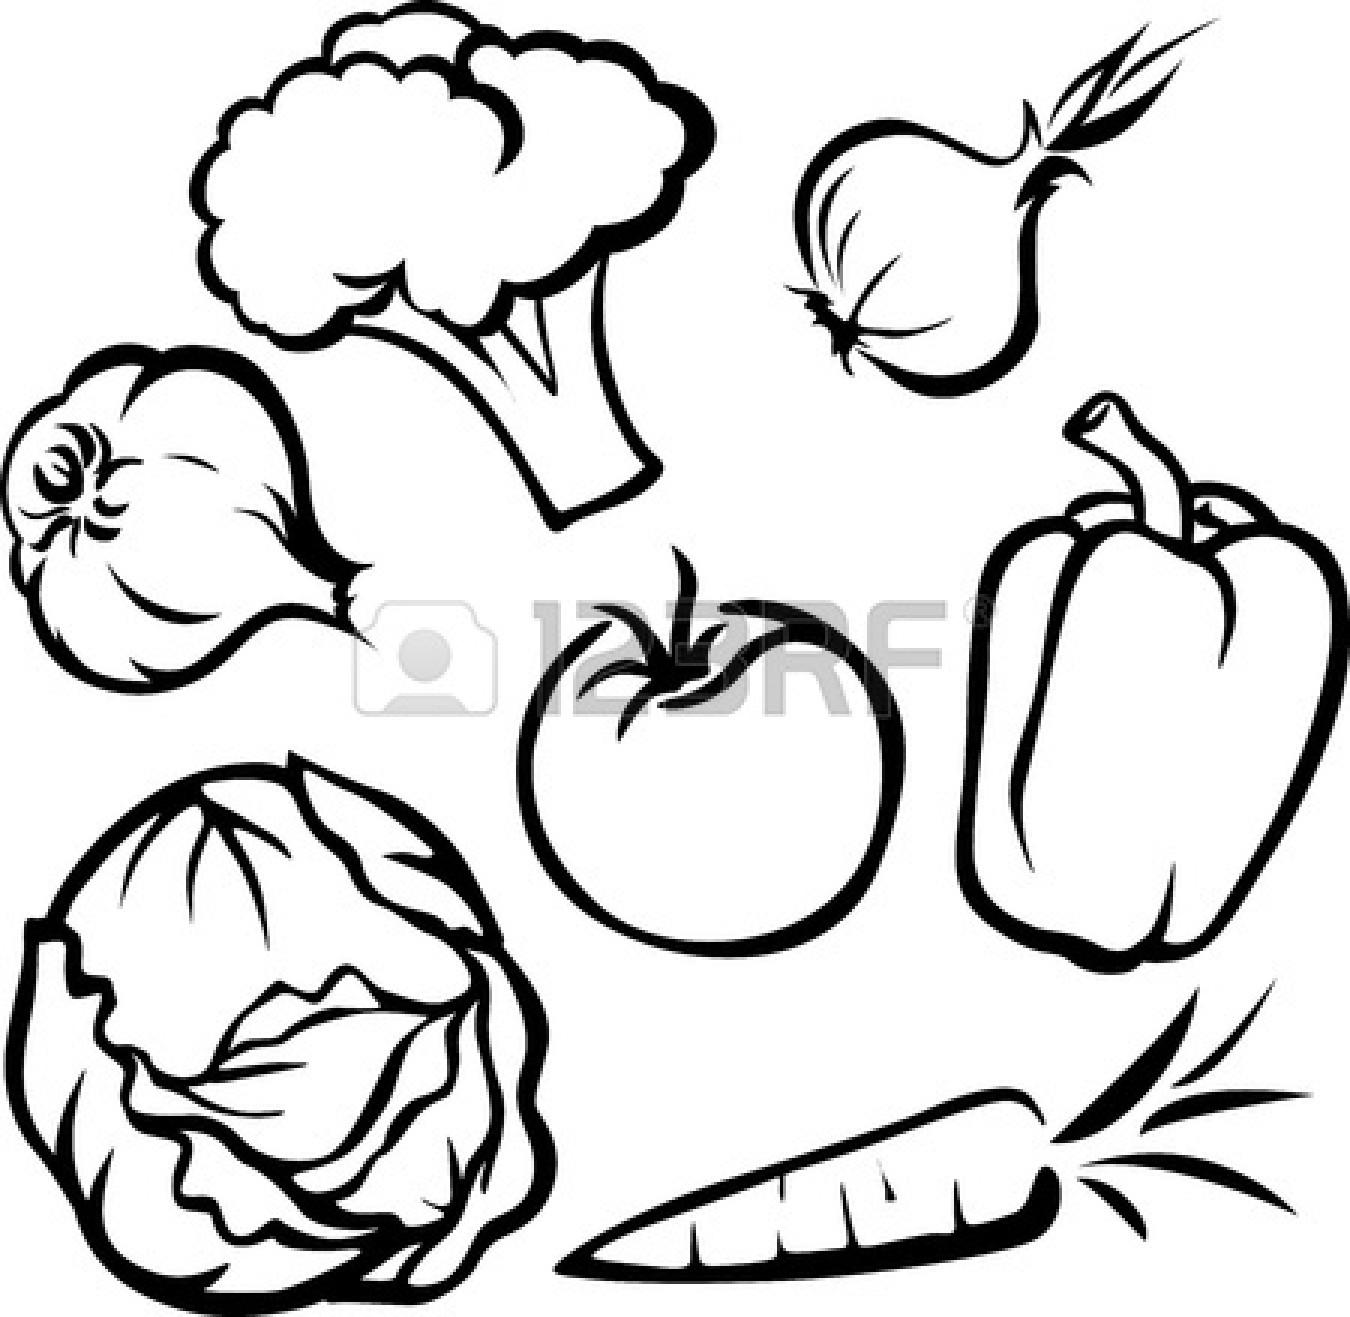 Vegetables Clipart Black And White Fruit And Vegetable Clipart Black